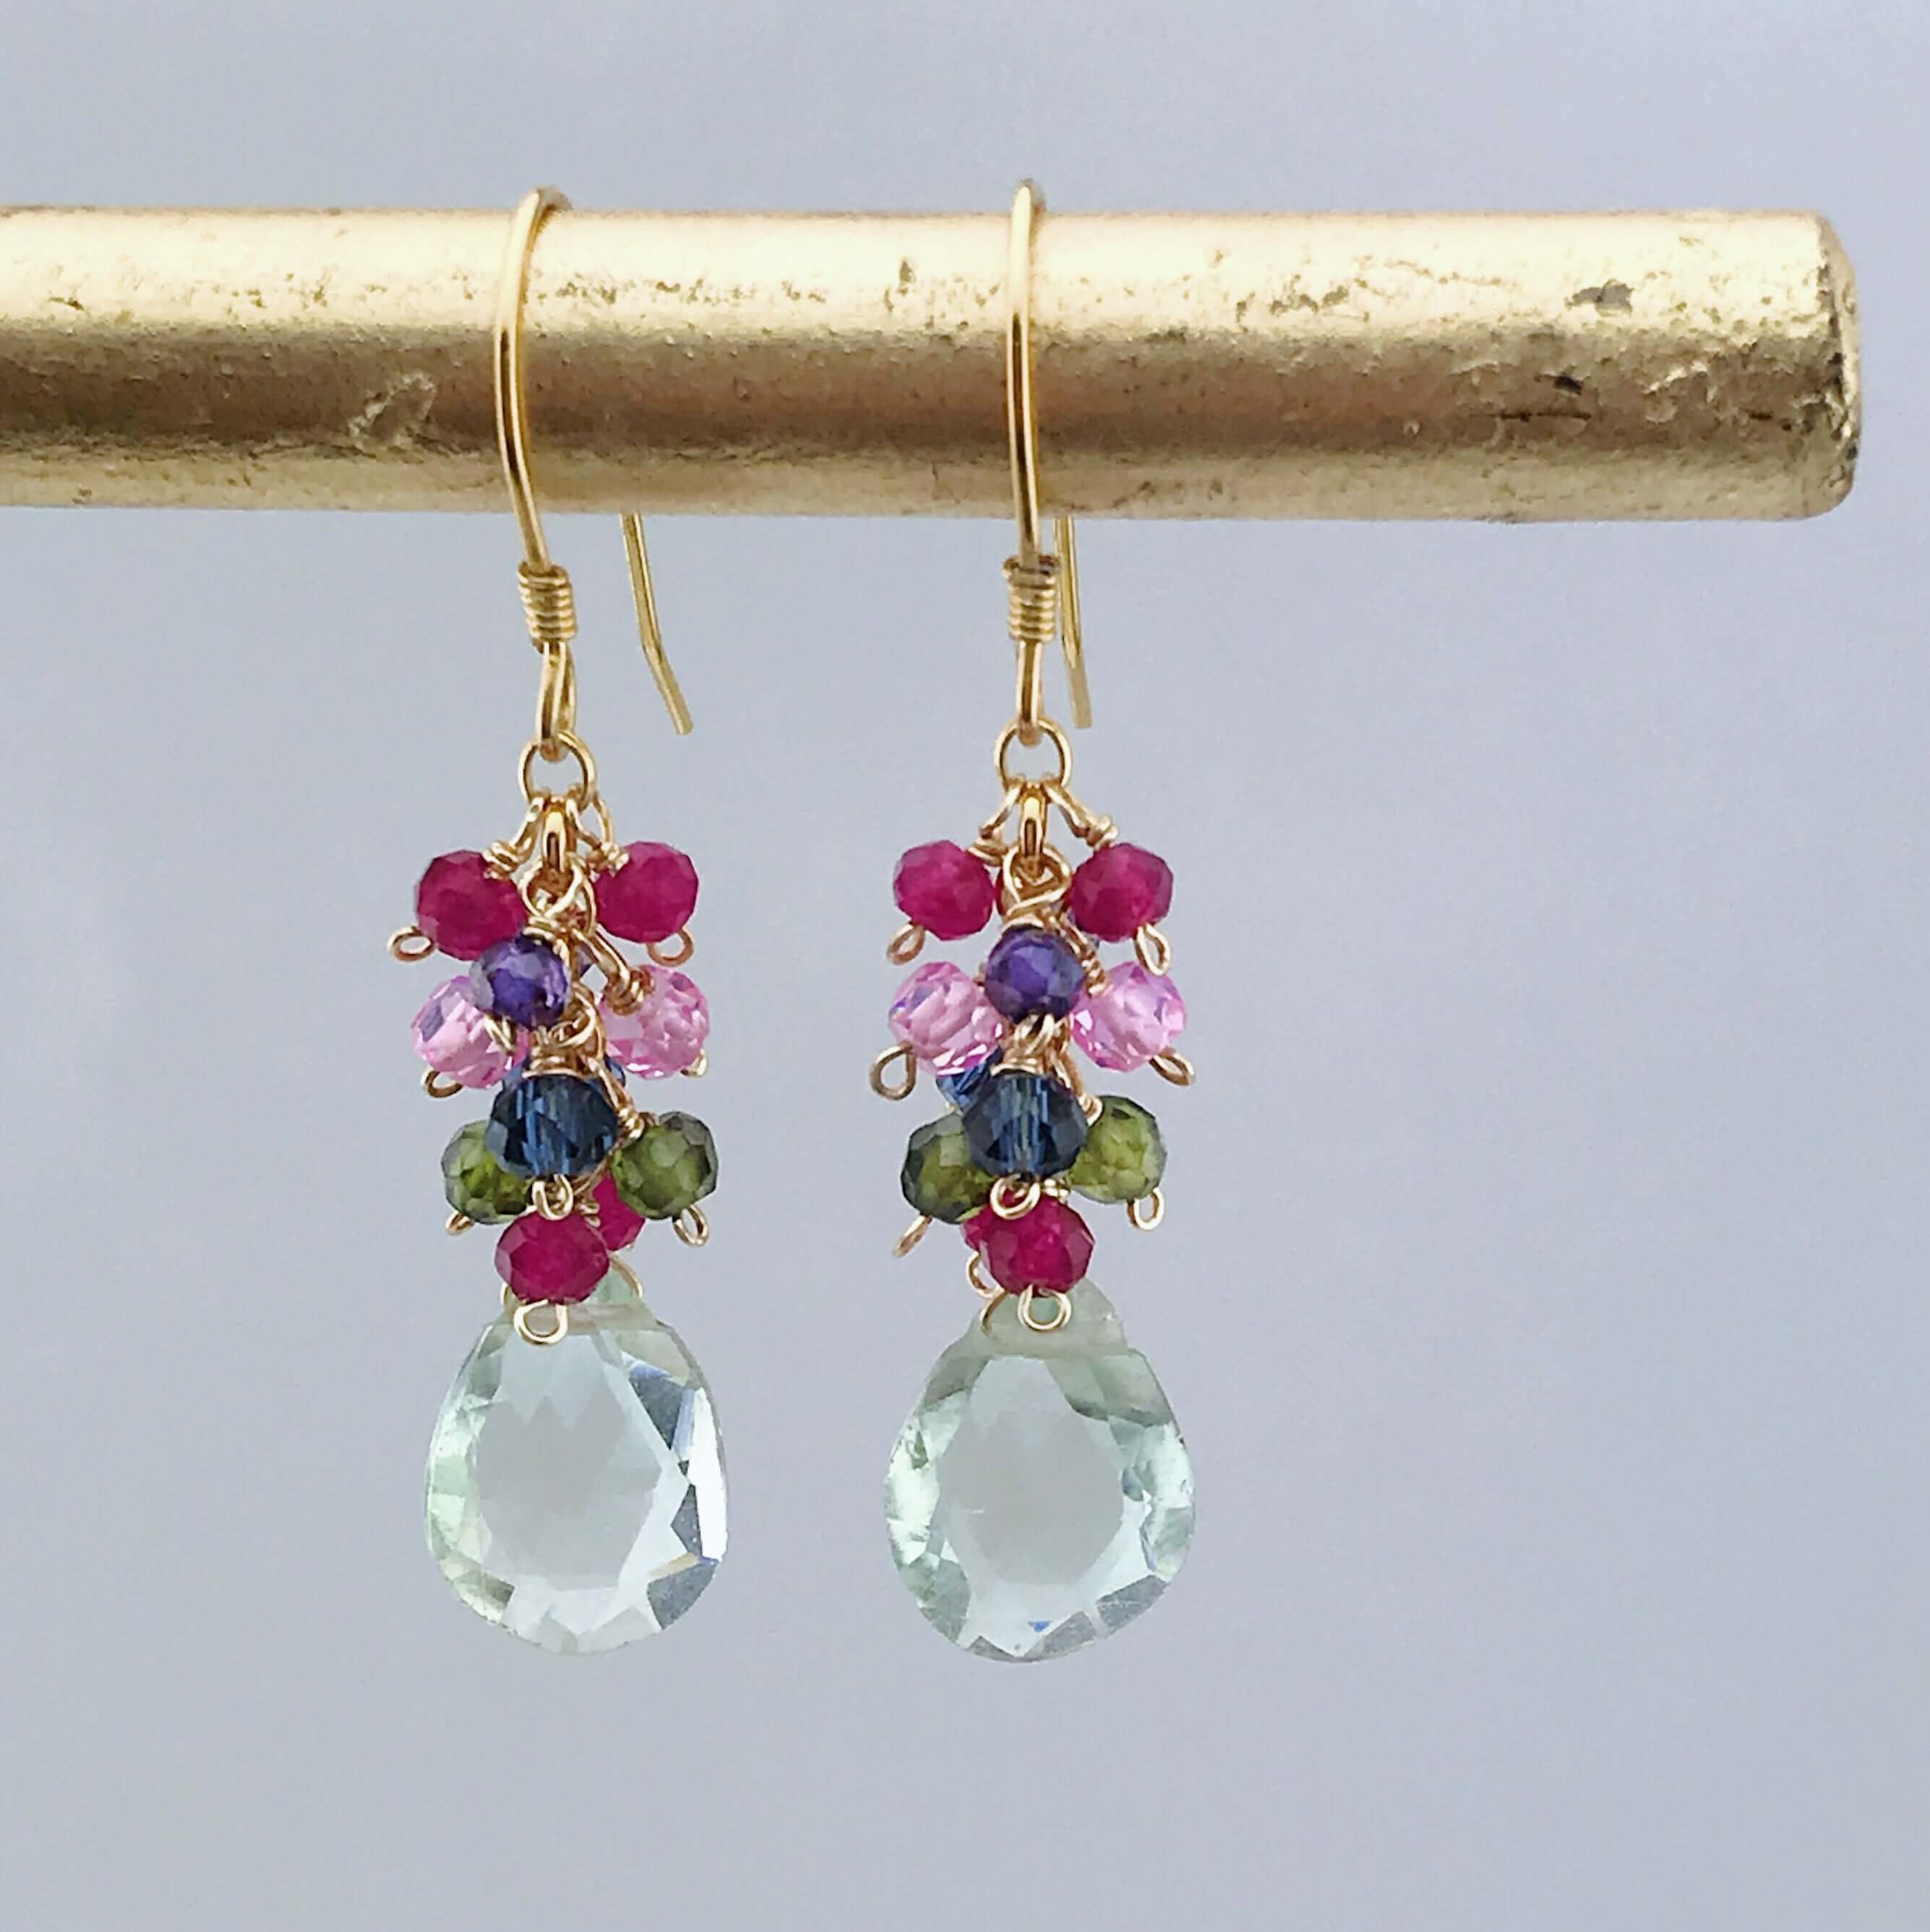 Gold Dangle Earrings Featuring Green Amethyst and Precious Stones